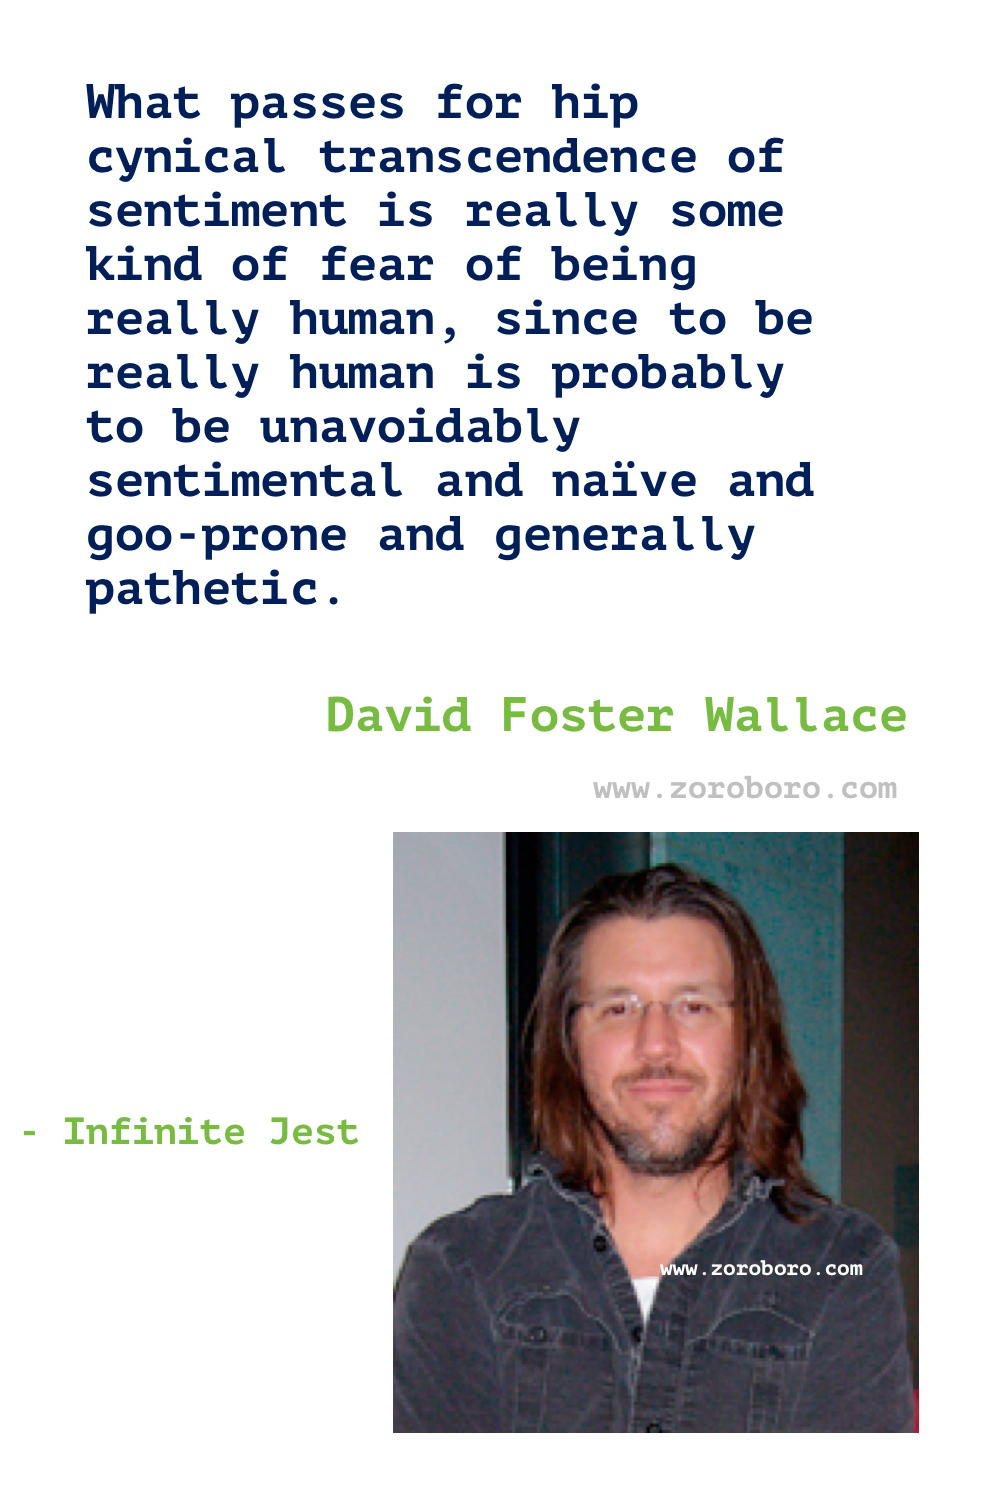 David Foster Wallace Quotes. David Foster Wallace Essays, Infinite Jest Quotes, This Is Water Quotes, David Foster Wallace Books Quotes, Movies, Stories. The Pale King. David Foster Wallace Quotes. Books, Giving, Infinite Jest Quotes, Loneliness Quotes, Worship Quotes, Writing Quotes.